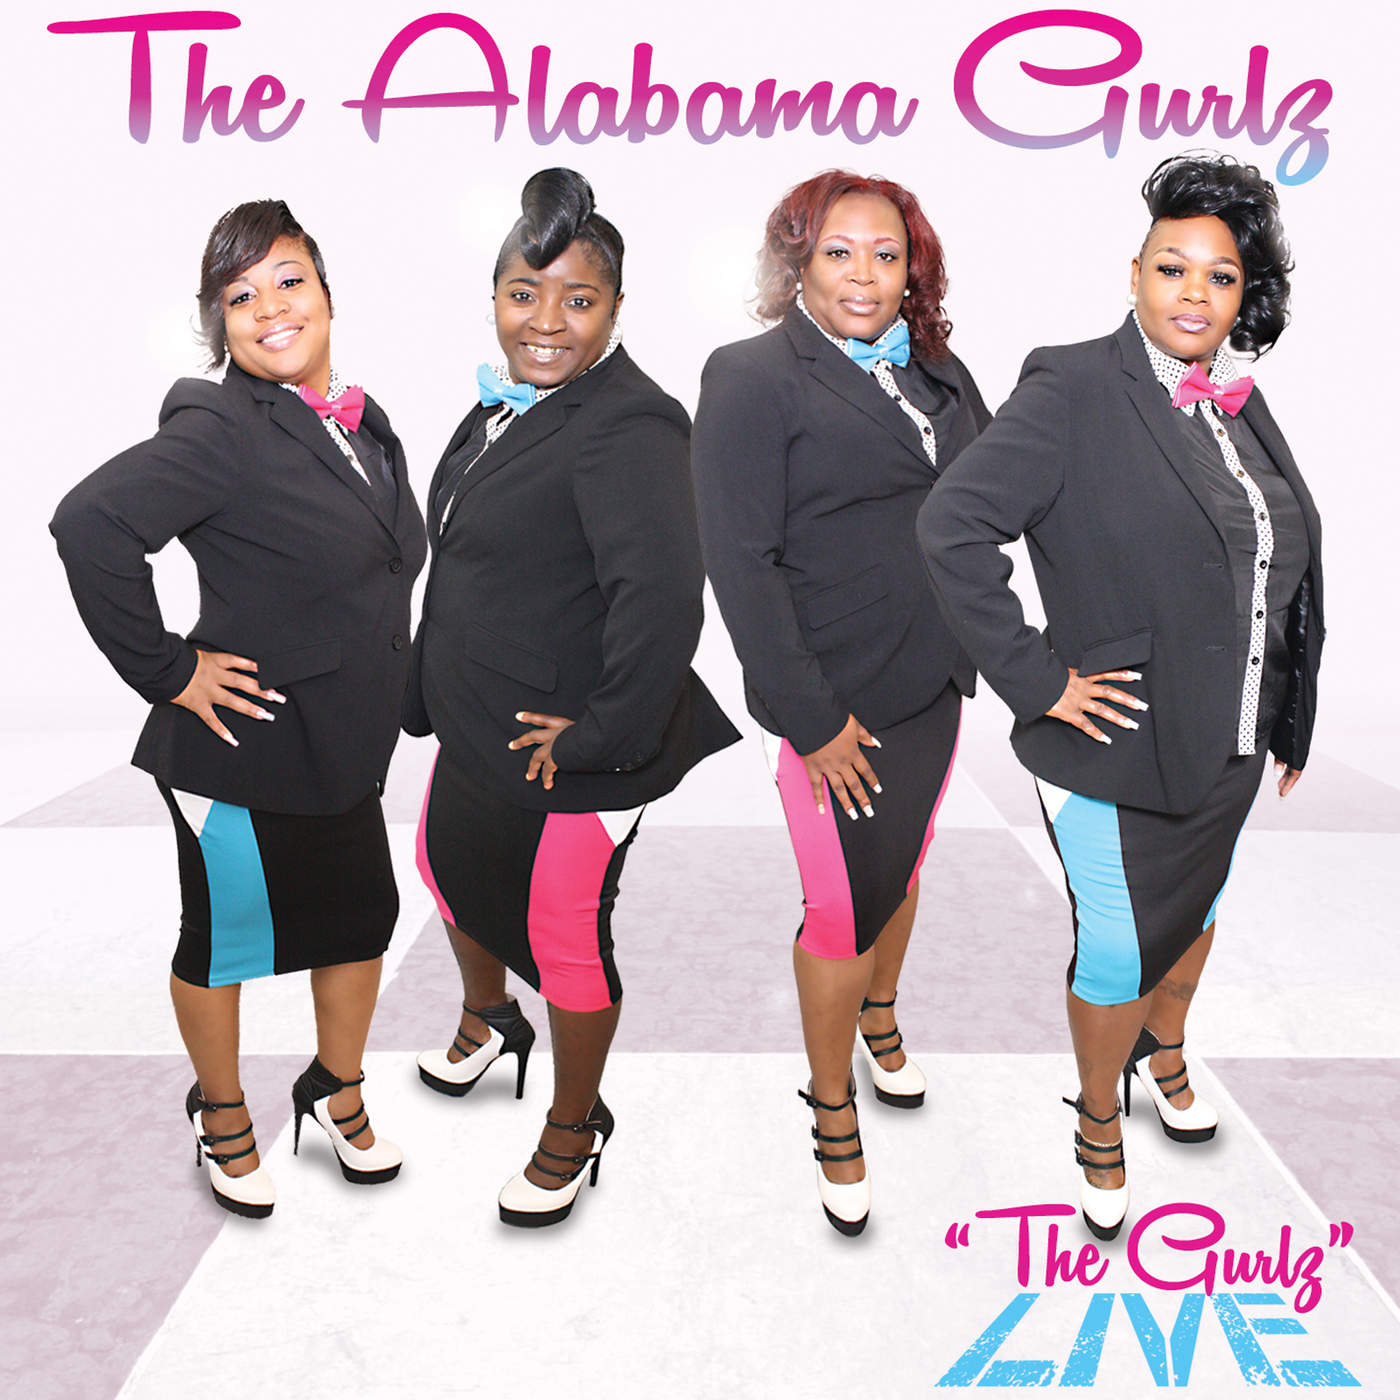 Art for Thank You by The Alabama Gurlz